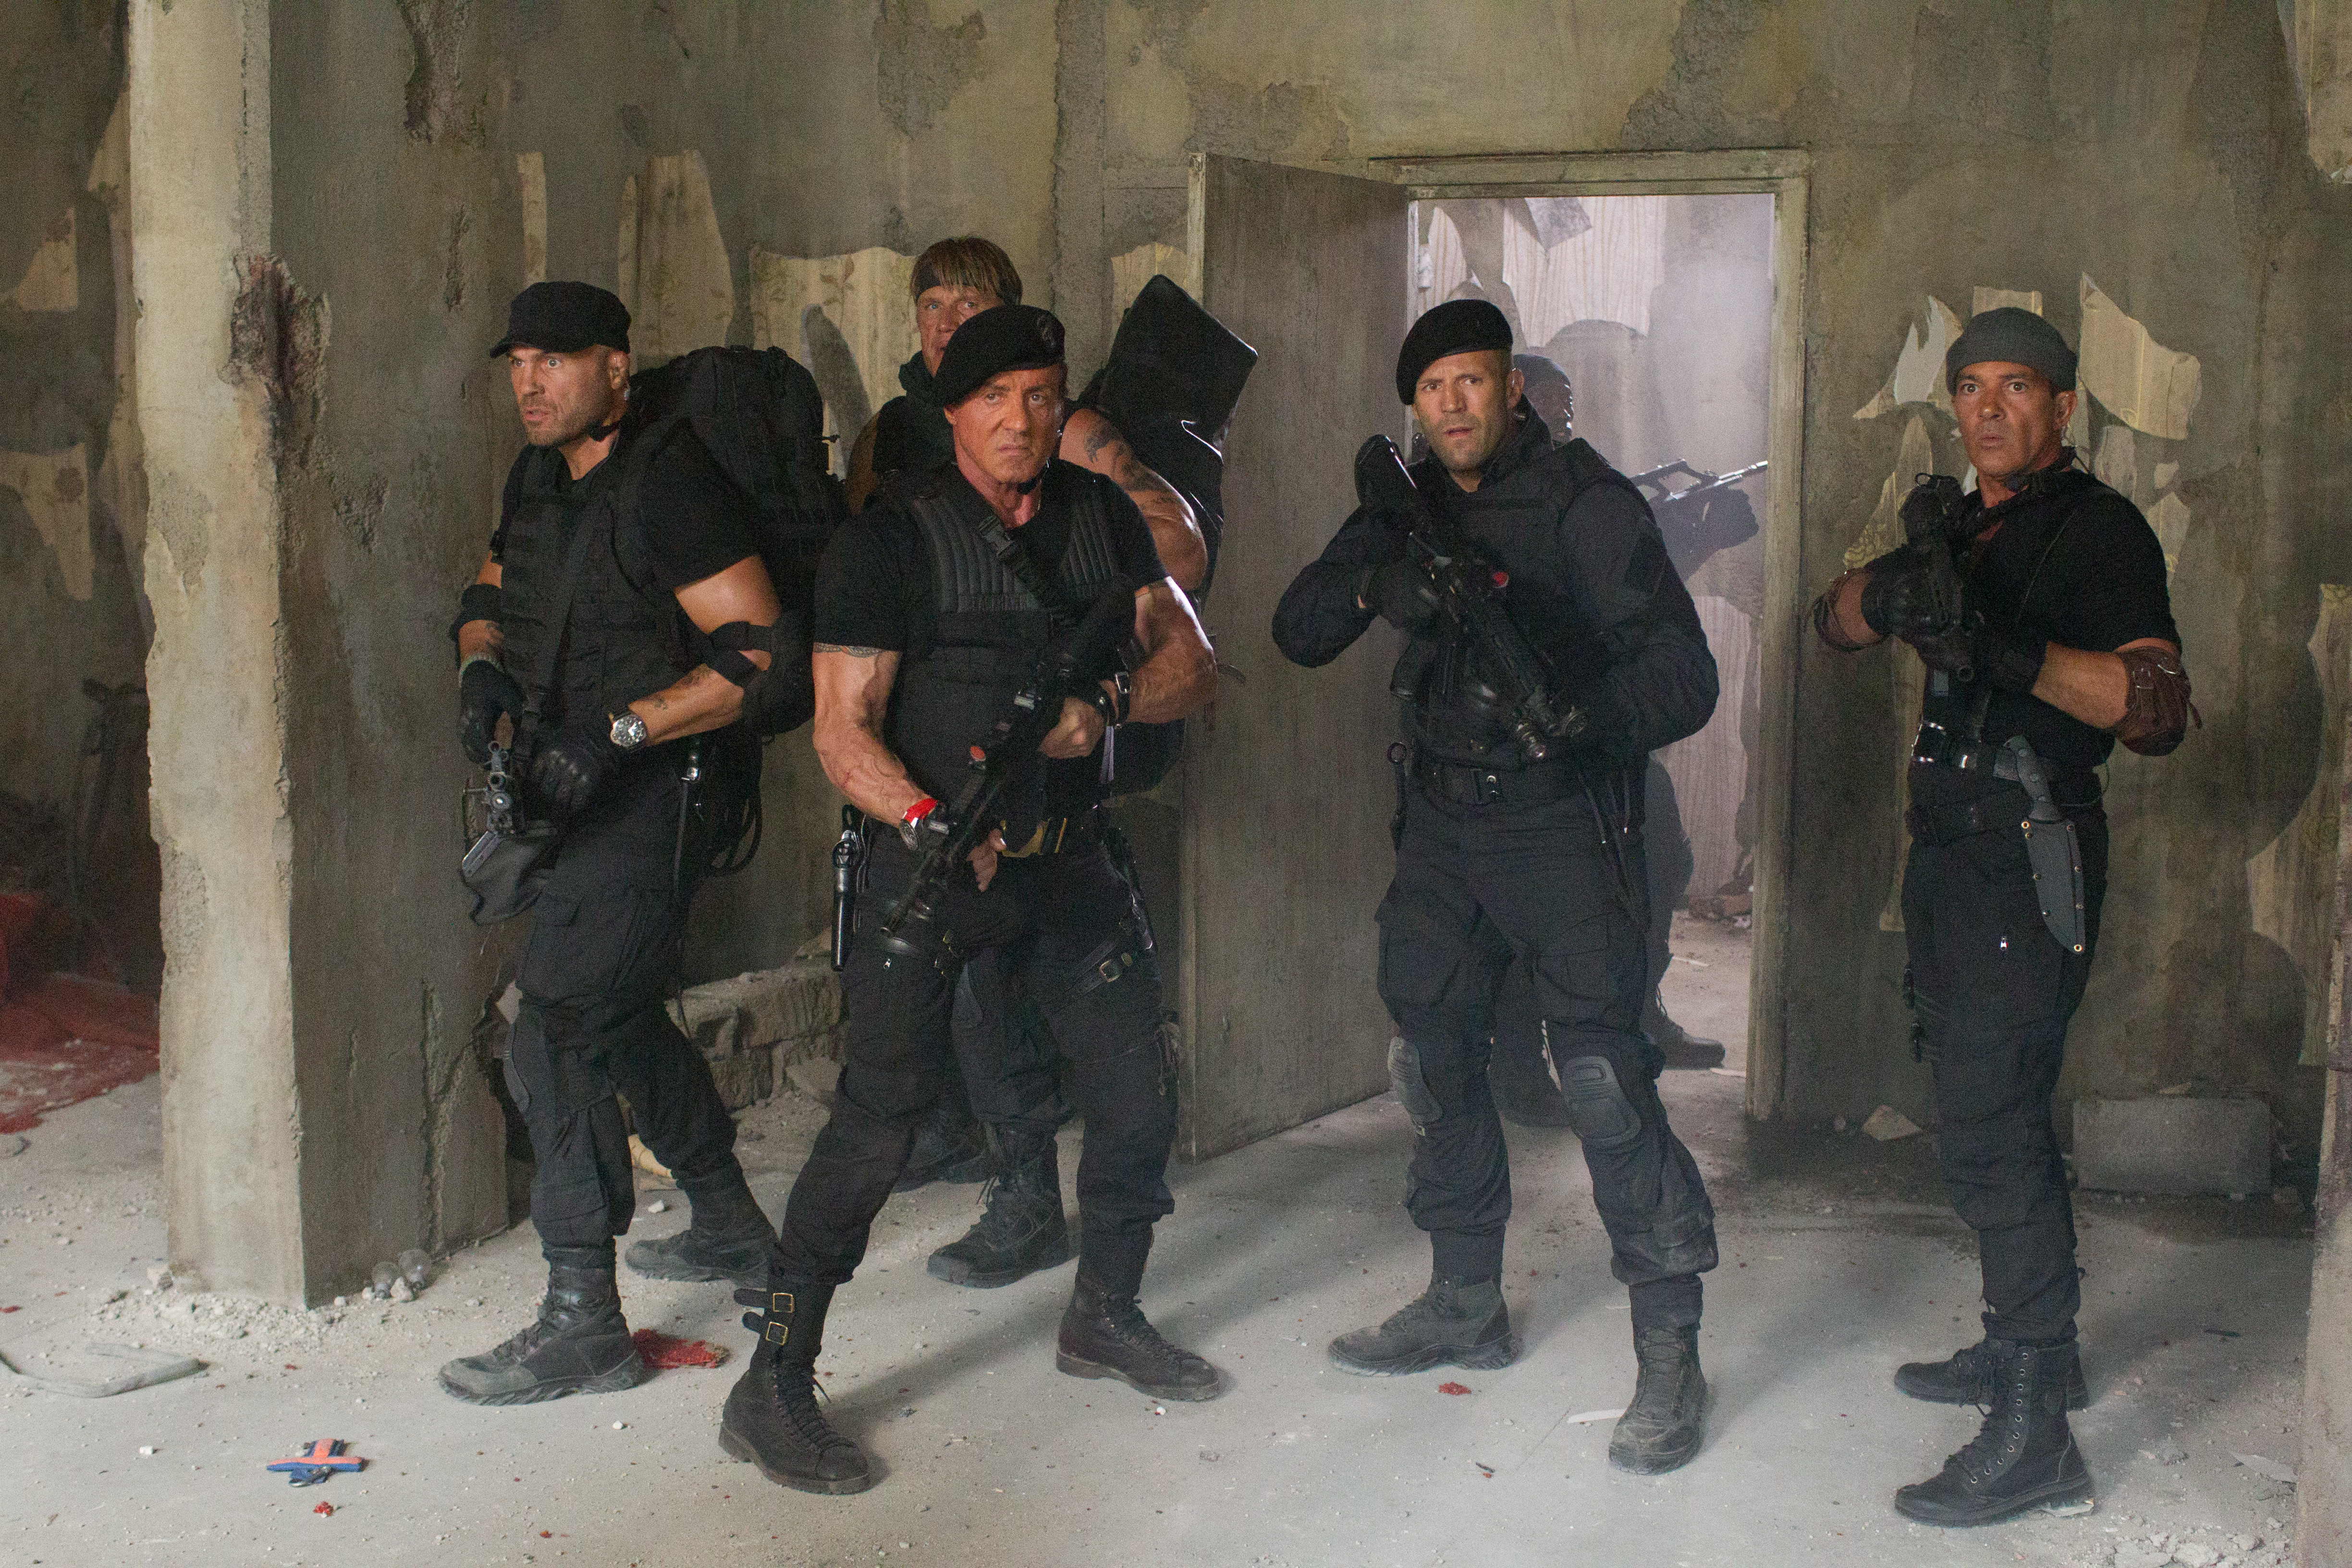 The Expendables 3 Barney Ross Sylvester Stallone Lee Christmas Jason Statham Toll Road Randy Couture 4896x3264